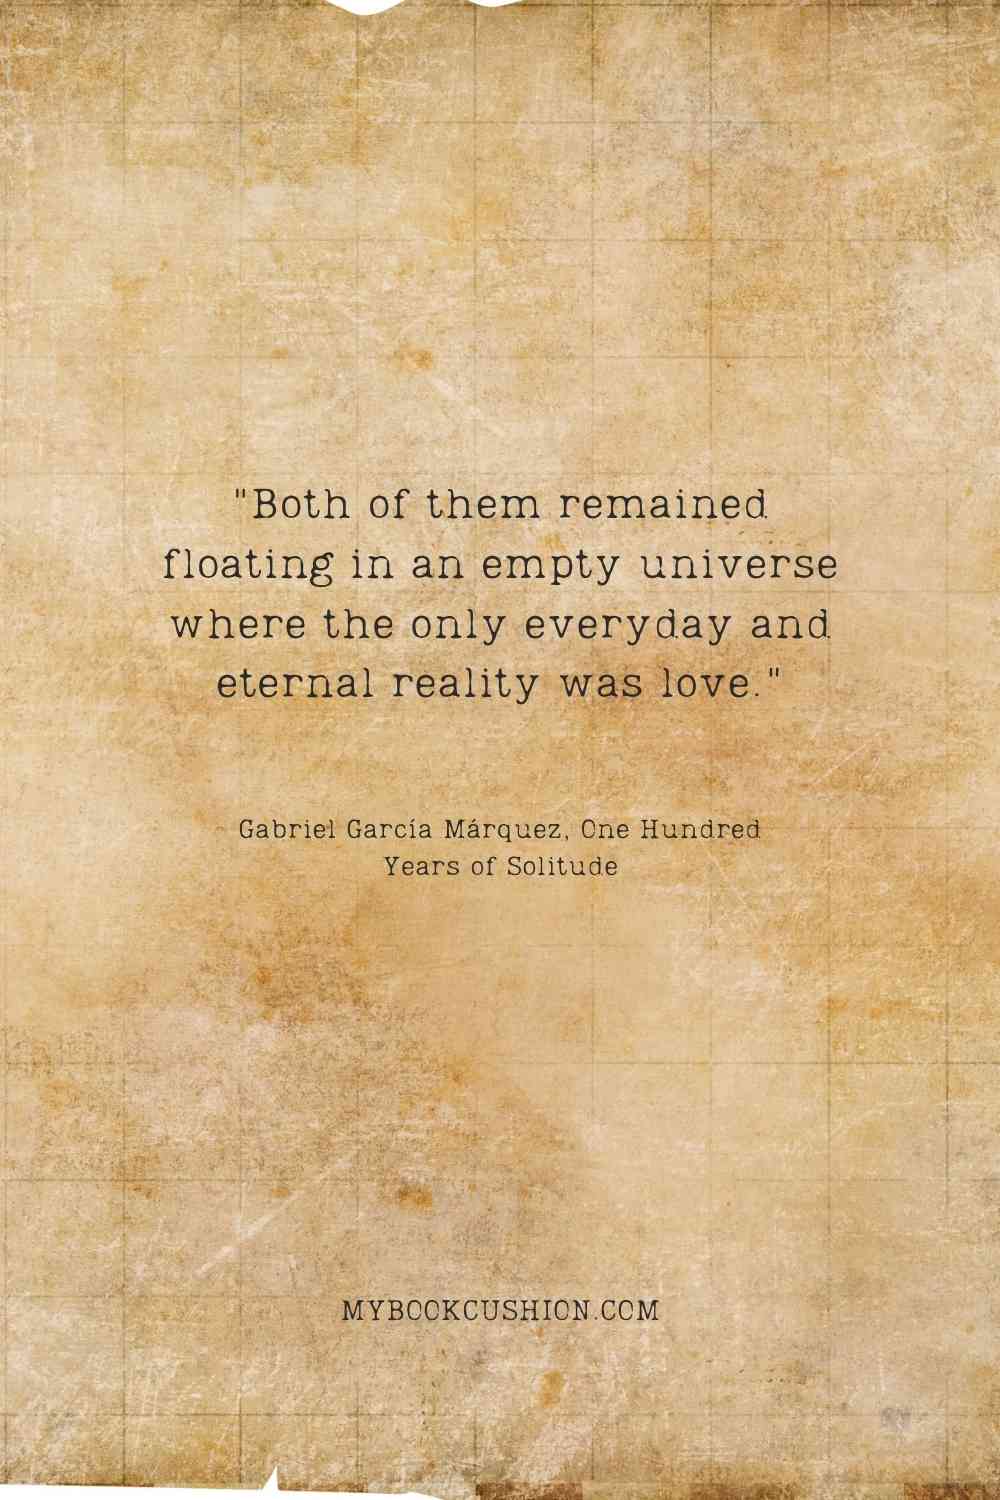 "Both of them remained floating in an empty universe where the only everyday and eternal reality was love." - Gabriel García Márquez, One Hundred Years of Solitude